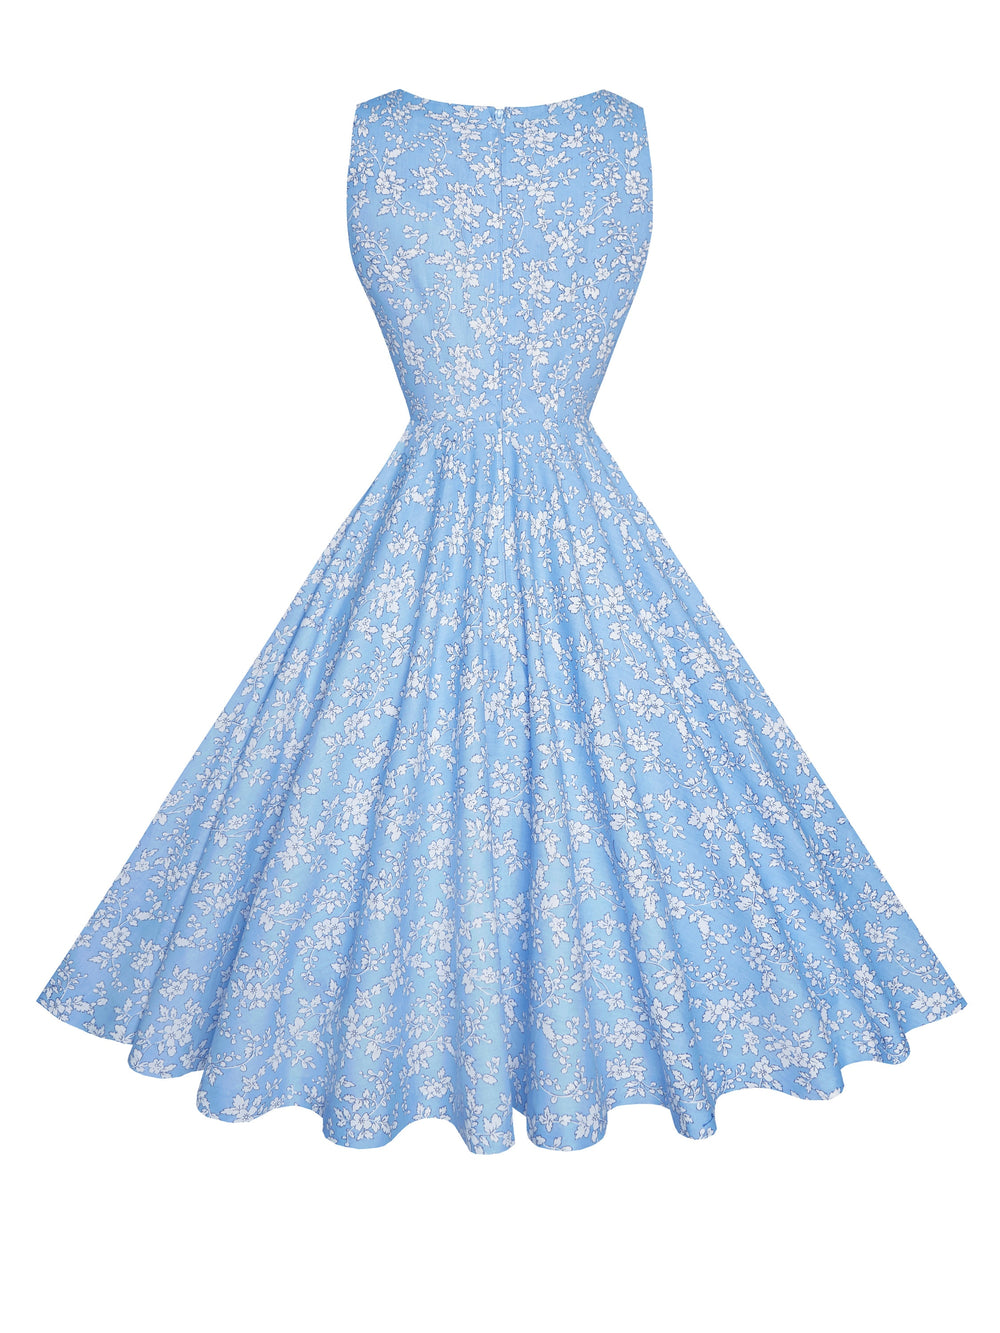 RTS - Size S - Norma Dress in Blue "Garden Party"